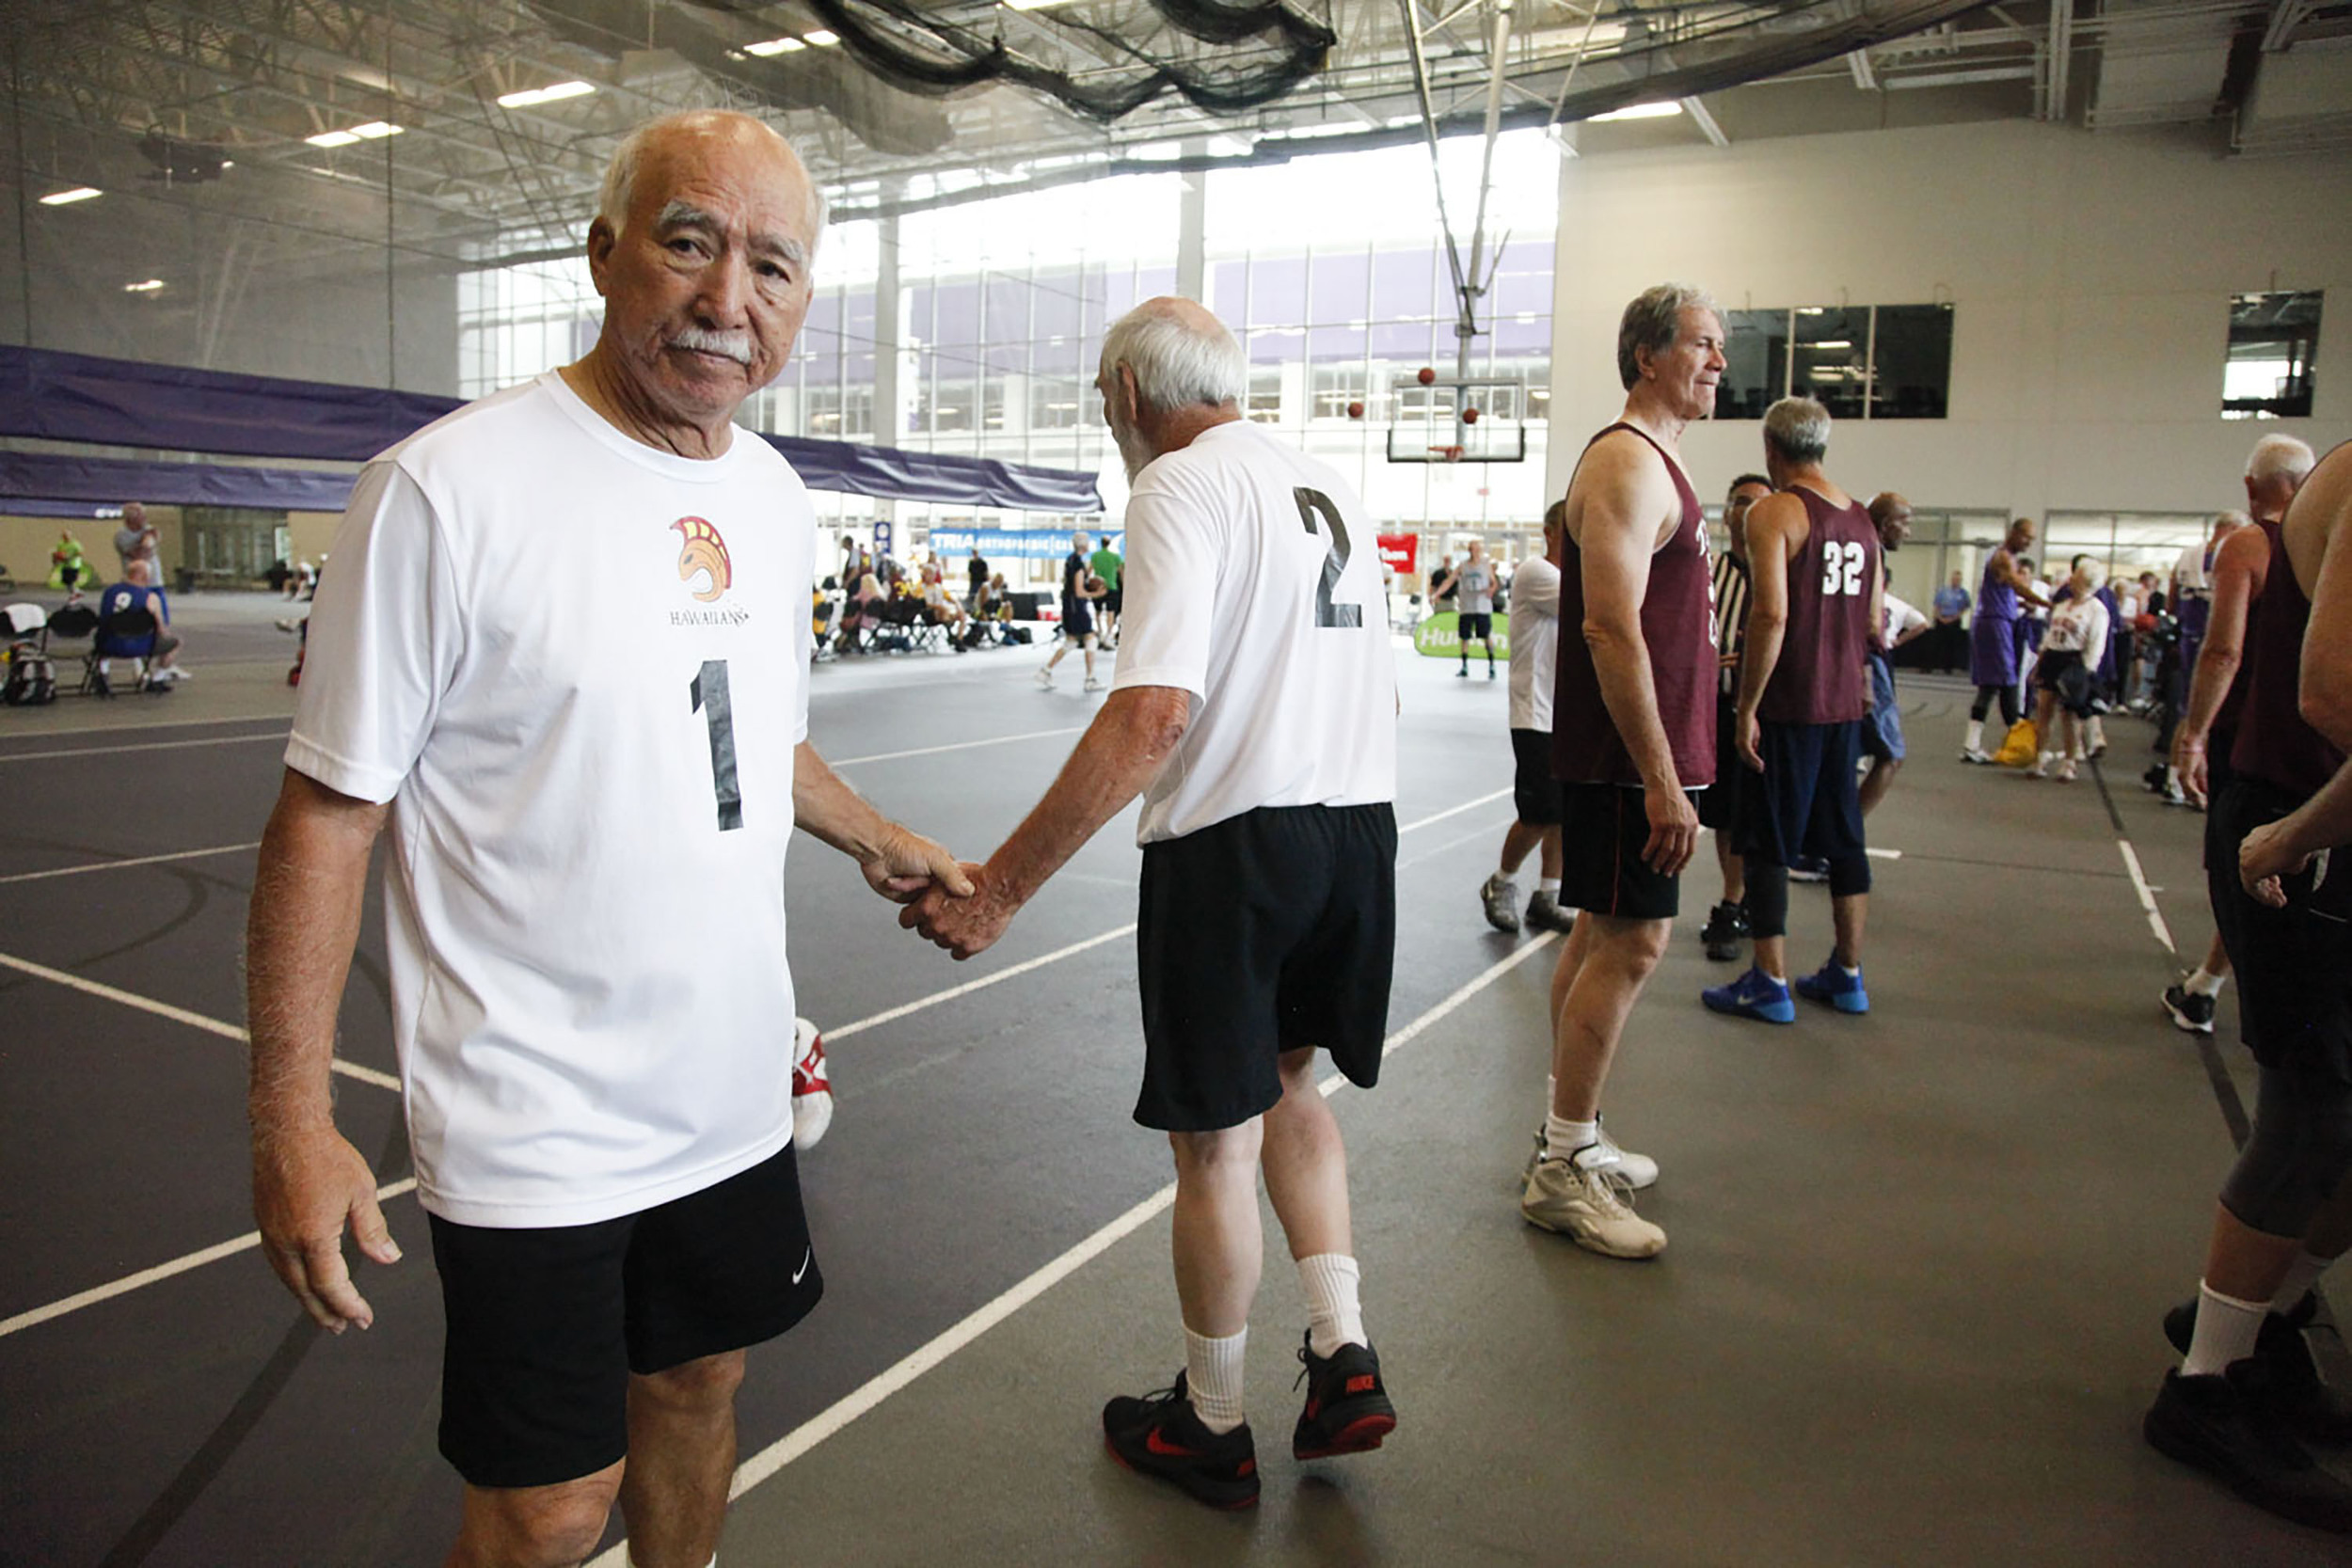  Wayne Kihune (left) and Jerry Schletzbaum (right) of the Hawaiians shake hands after a game against Taylor Law during the National Senior Games basketball competition. This competition took place at the St. Thomas University Basketball Court in St. 